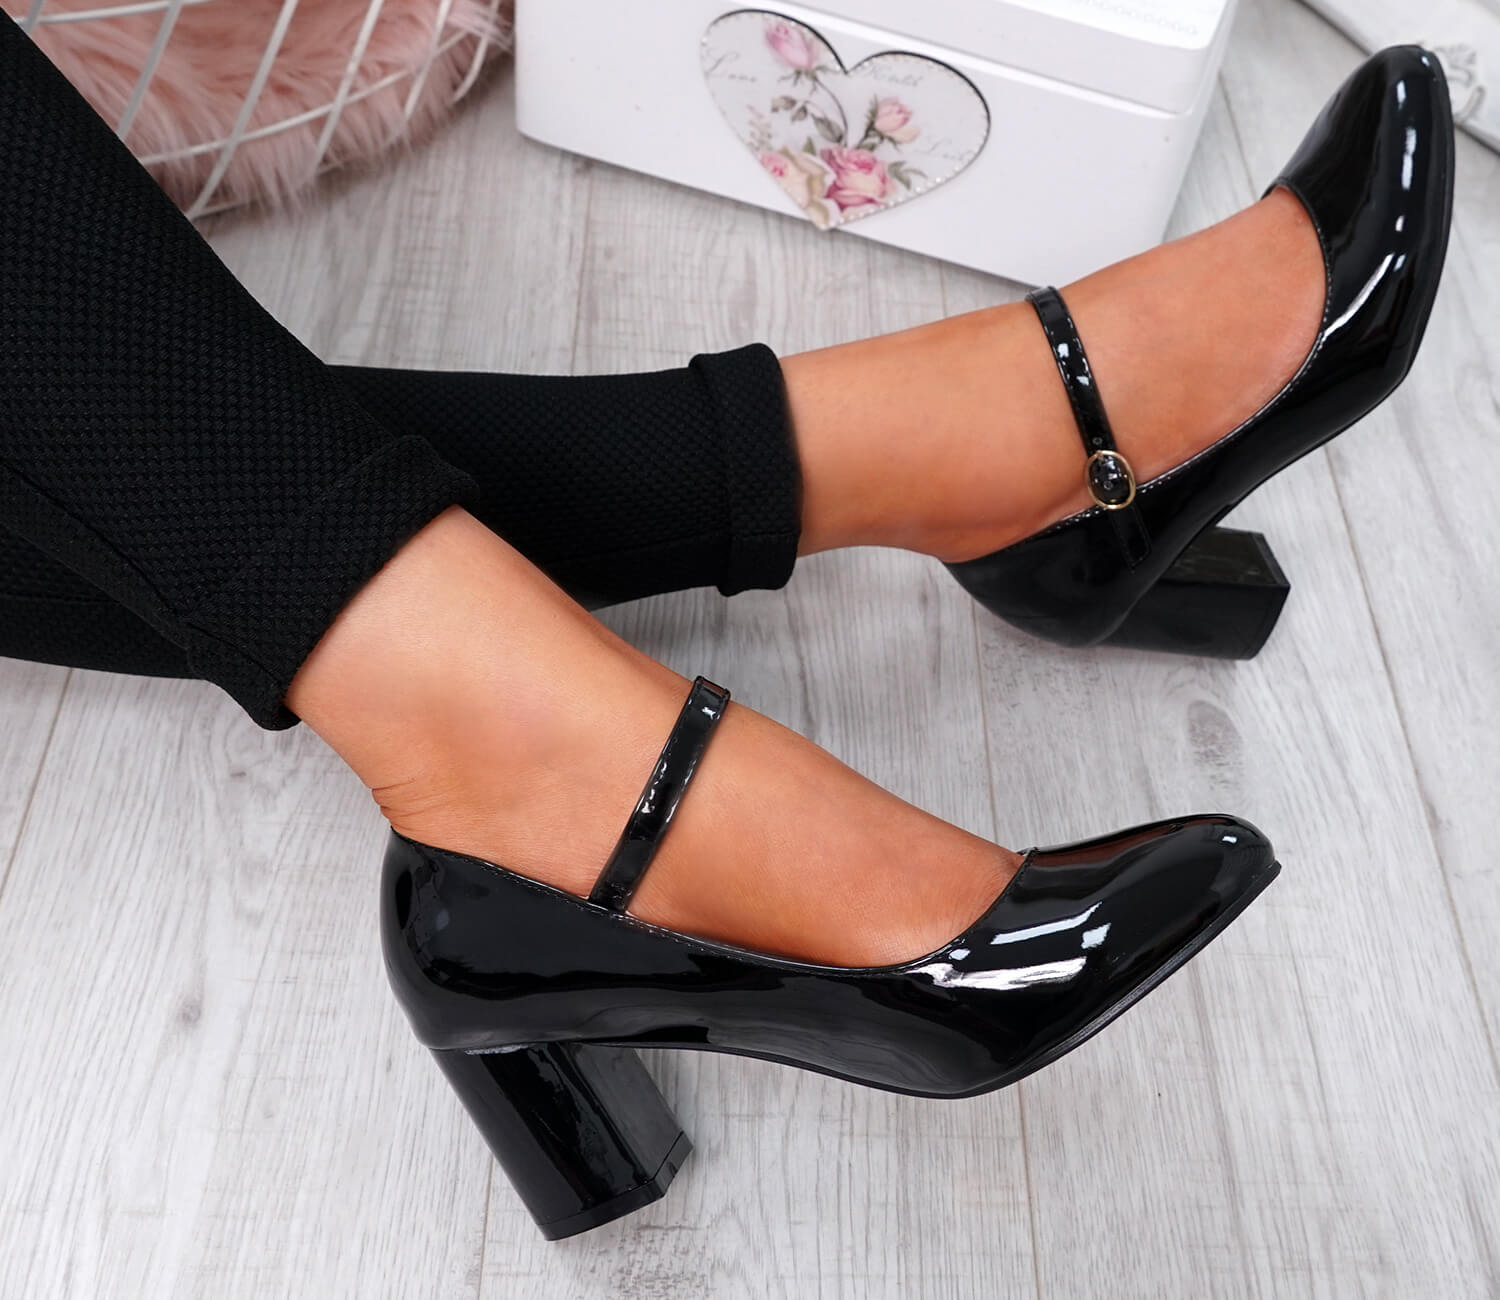 WOMENS LADIES MID BLOCK HEEL MARY JANE OFFICE WORK FORMAL STRAP DOLLY SHOES SIZE | eBay